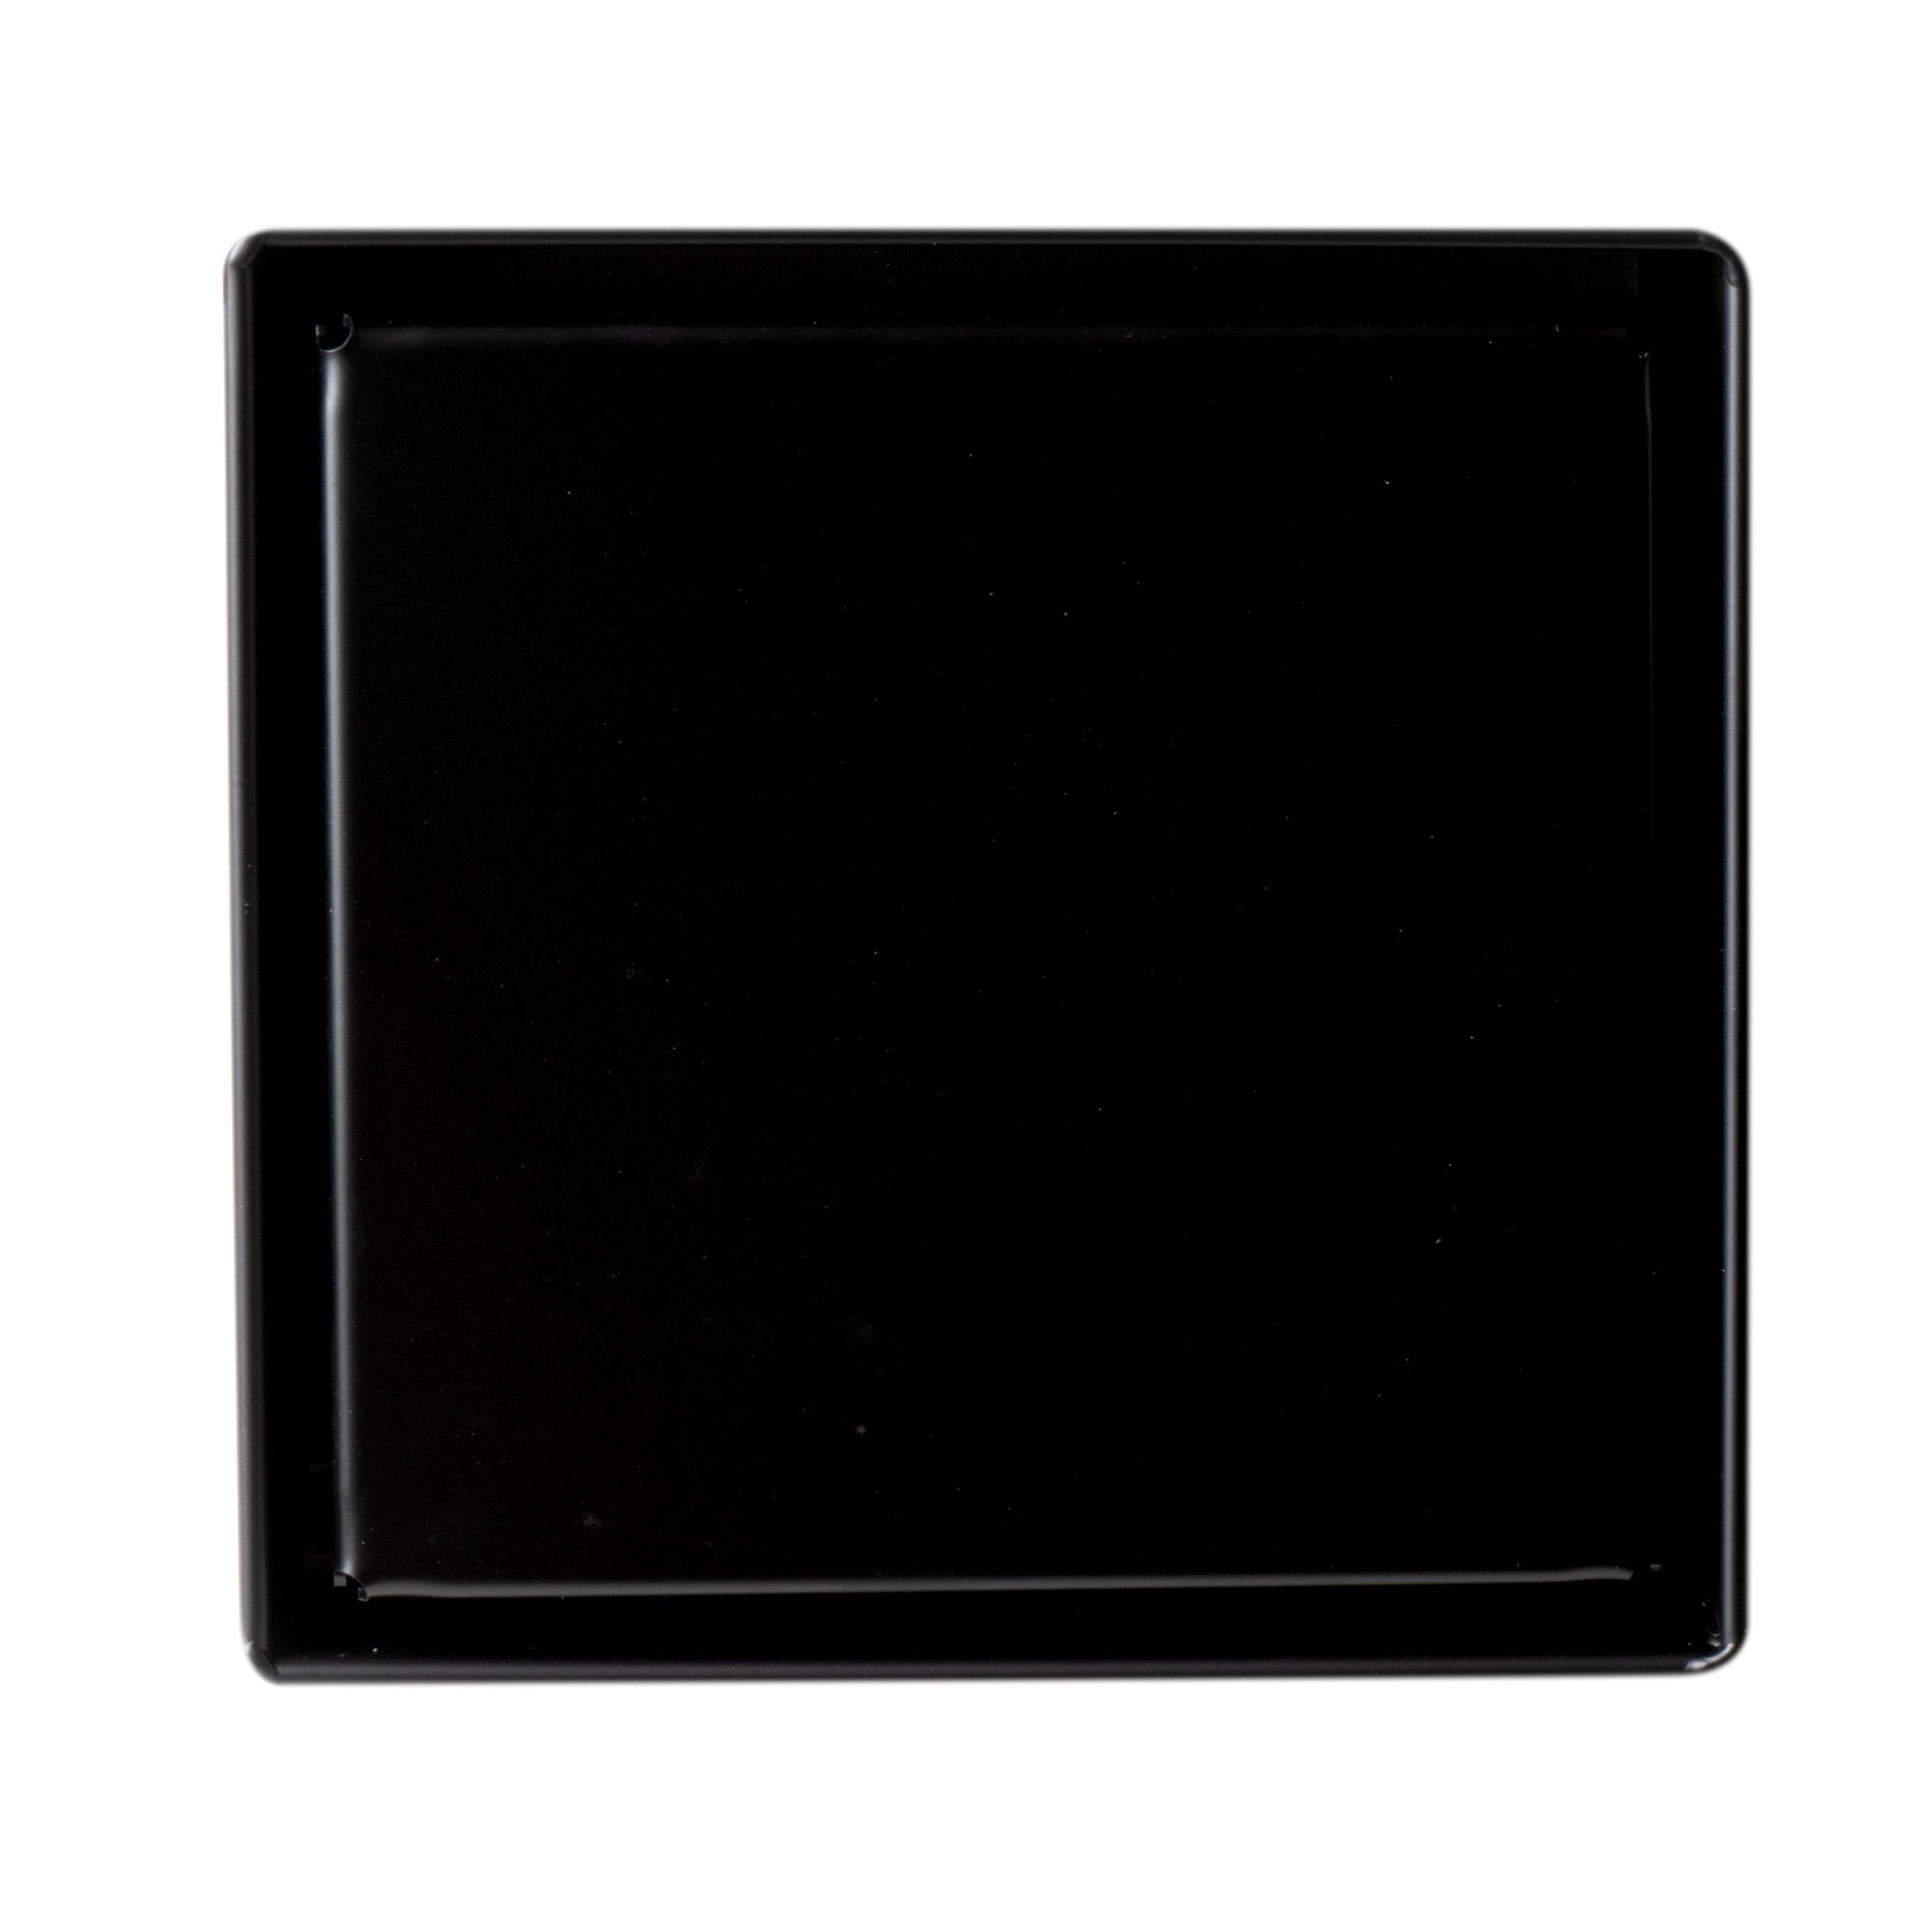 ALFI Brand - 5" x 5" Black Matte Square Stainless Steel Shower Drain with Solid Cover | ABSD55B-BM